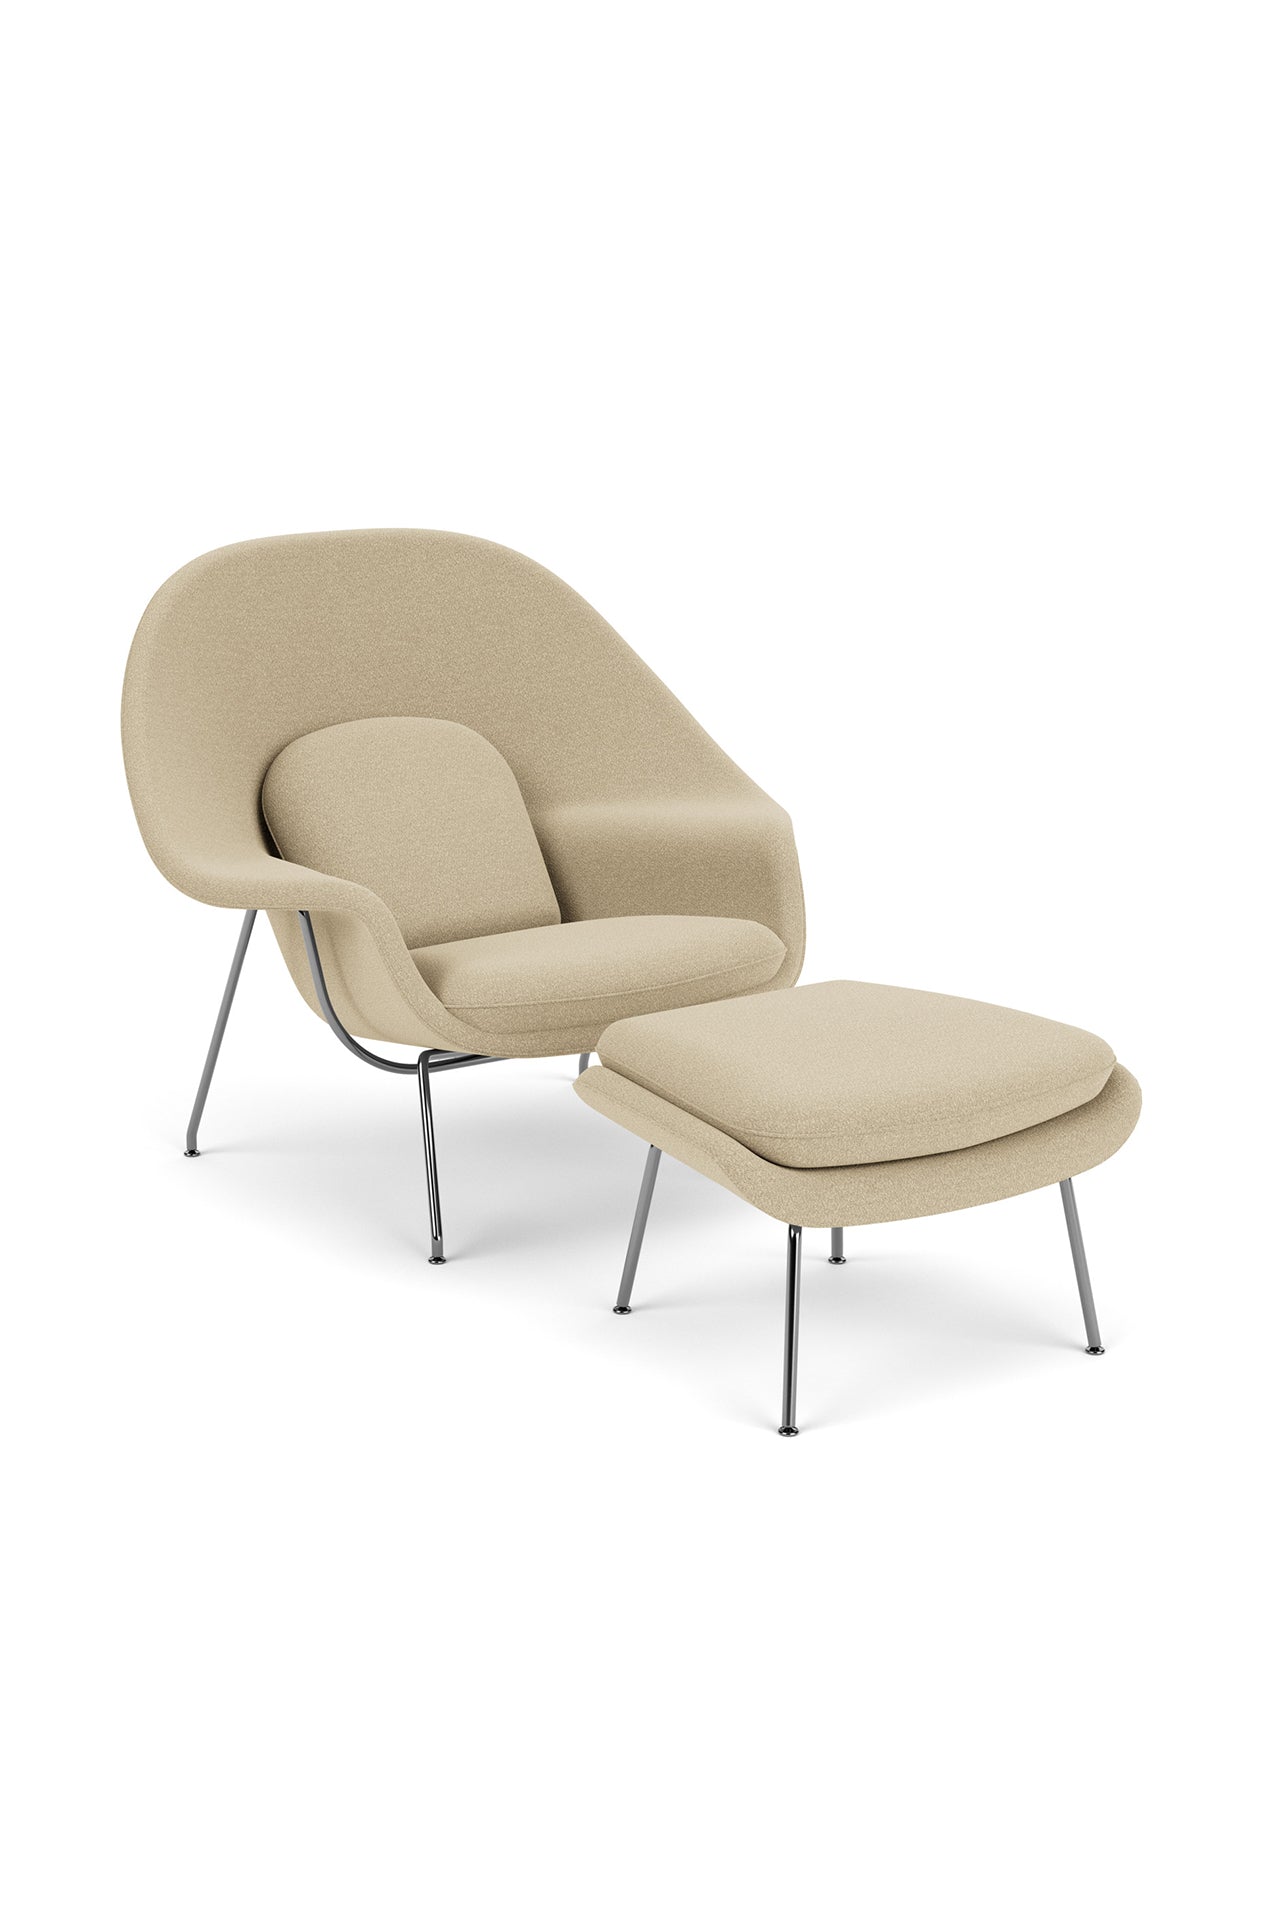 Knoll Womb Chair With Ottoman Designed By Eero Saarinen in Neutral Tan - Front Image (6606269907059)